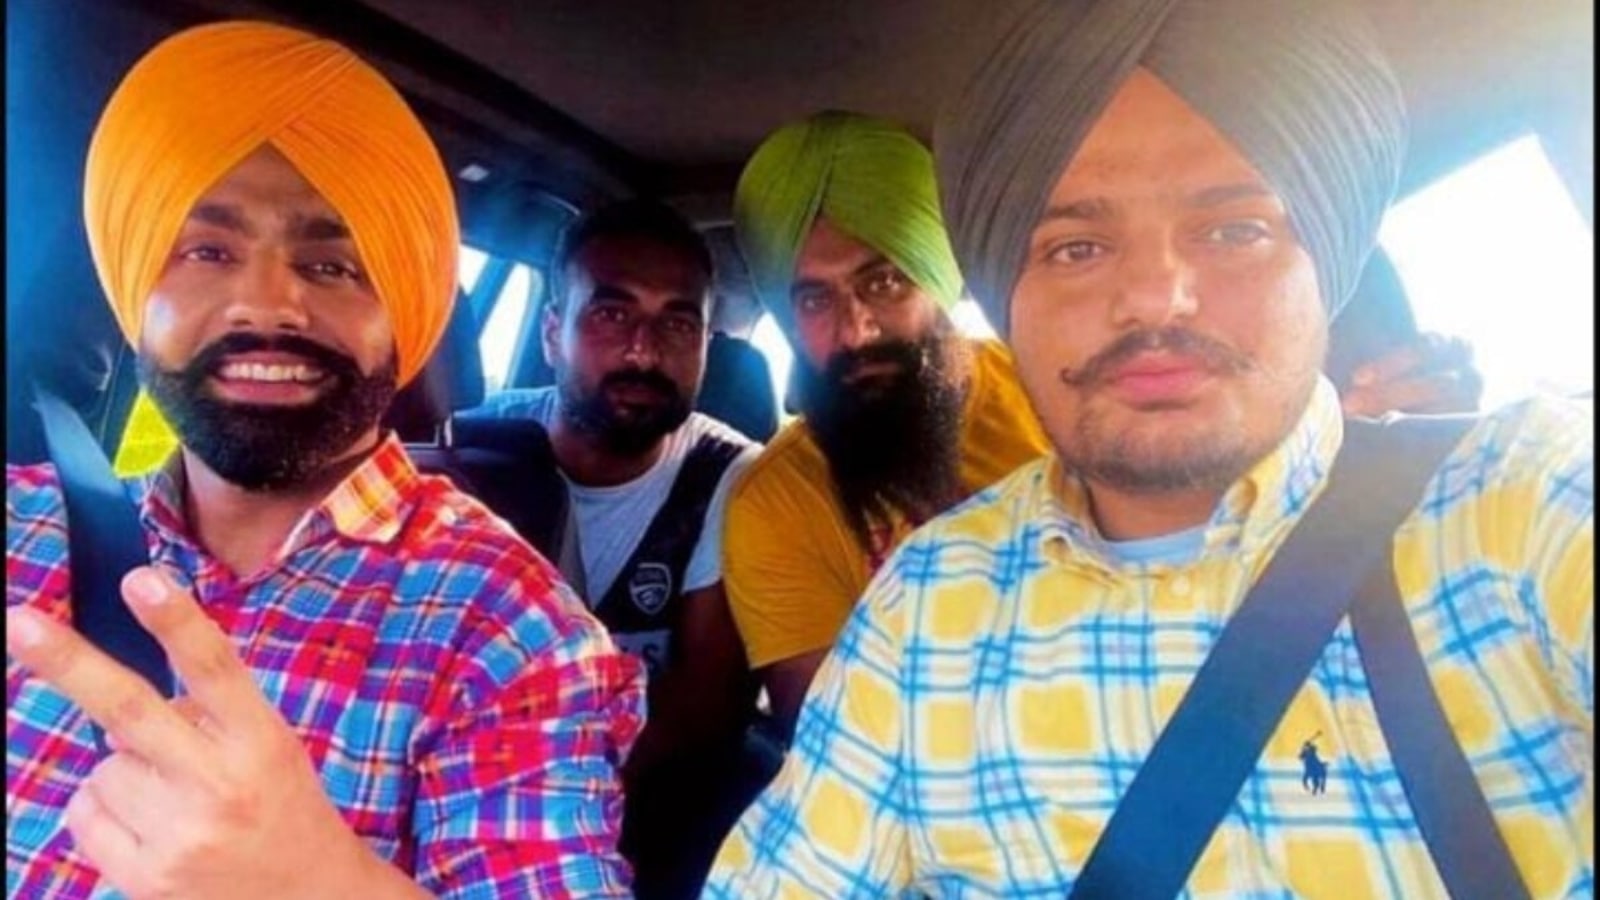 After Sidhu Moose Wala’s death Ammy Virk wanted to delay his film Sher Bagga indefinitely: ‘But majboori hai’